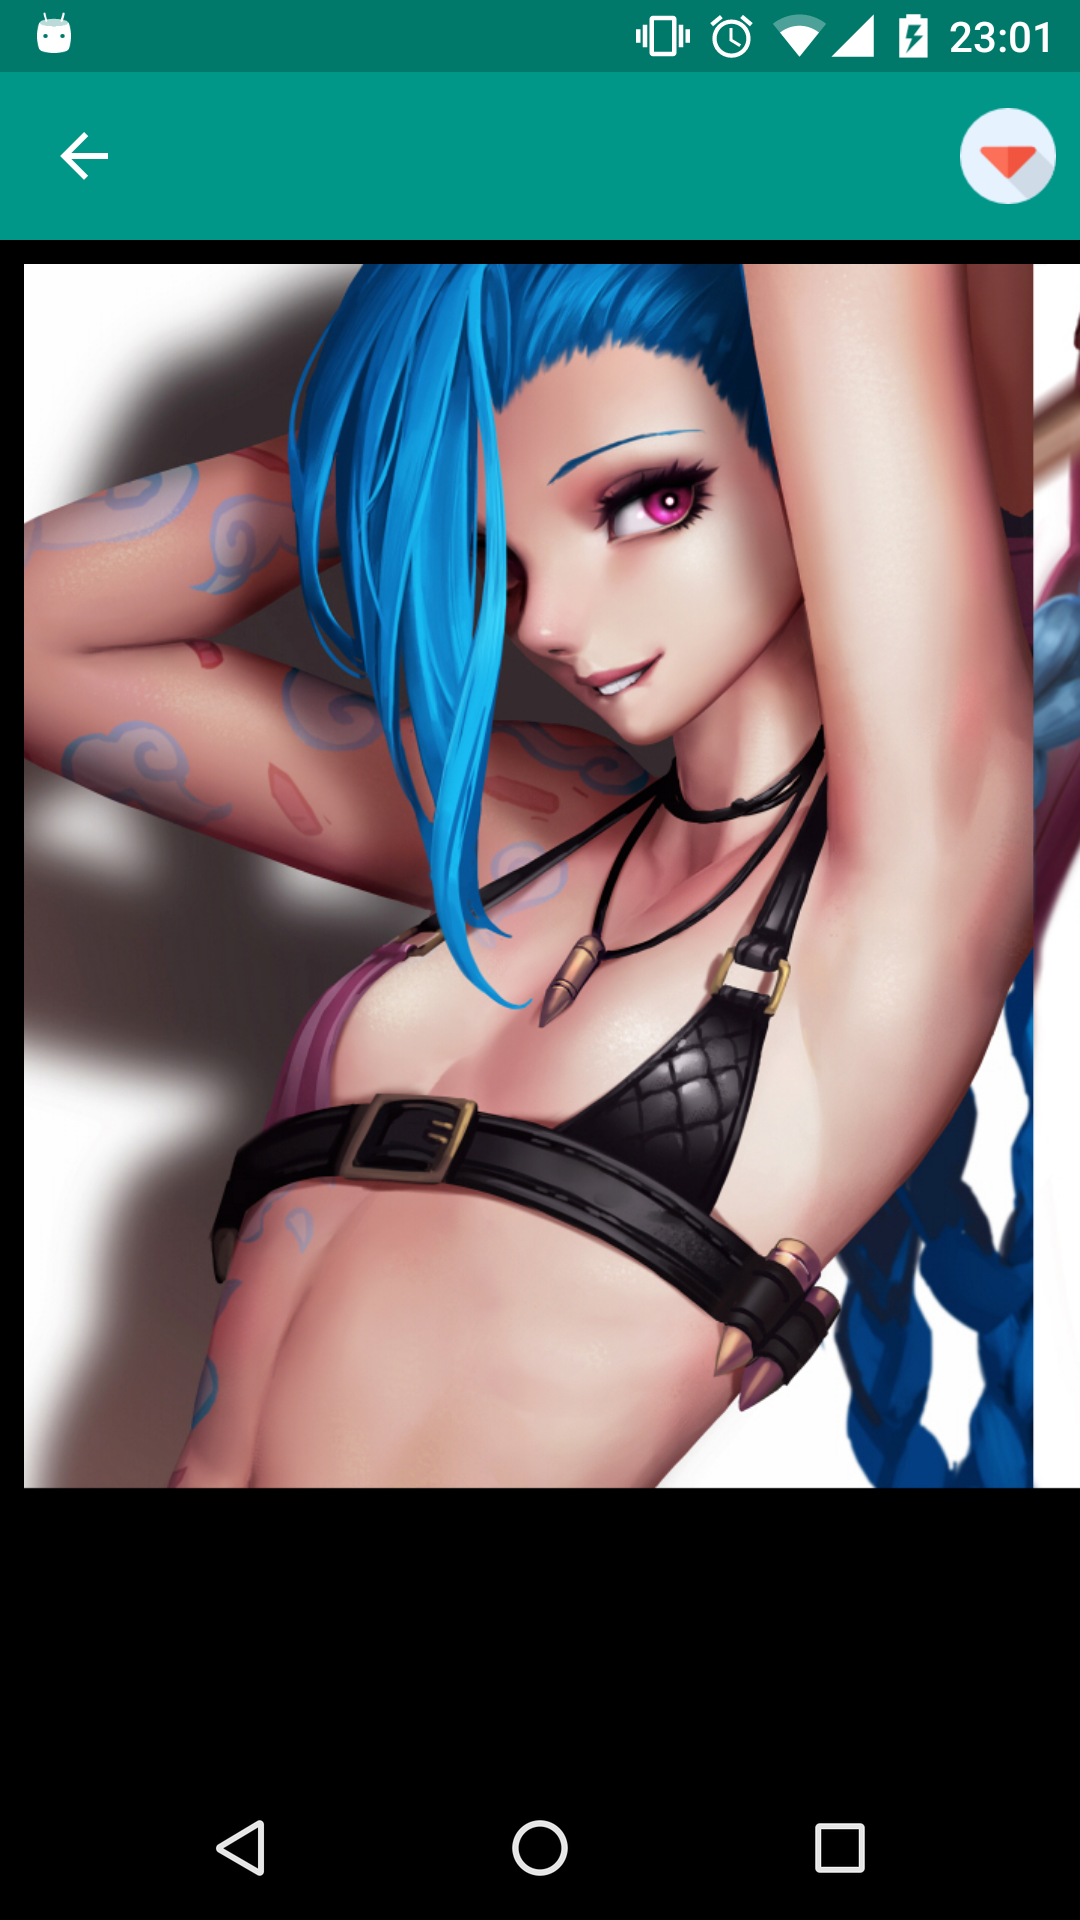 League of Legends wallpapers apk,صور,sex,تطبيق,download,legends,backgrounds,league,هنتاي,erotica,apps,sexy,pic,wallpaper,tuesday,hentai,free,porn,photo,pics,panties,titty,wallpapers,downloading,images,app,adult